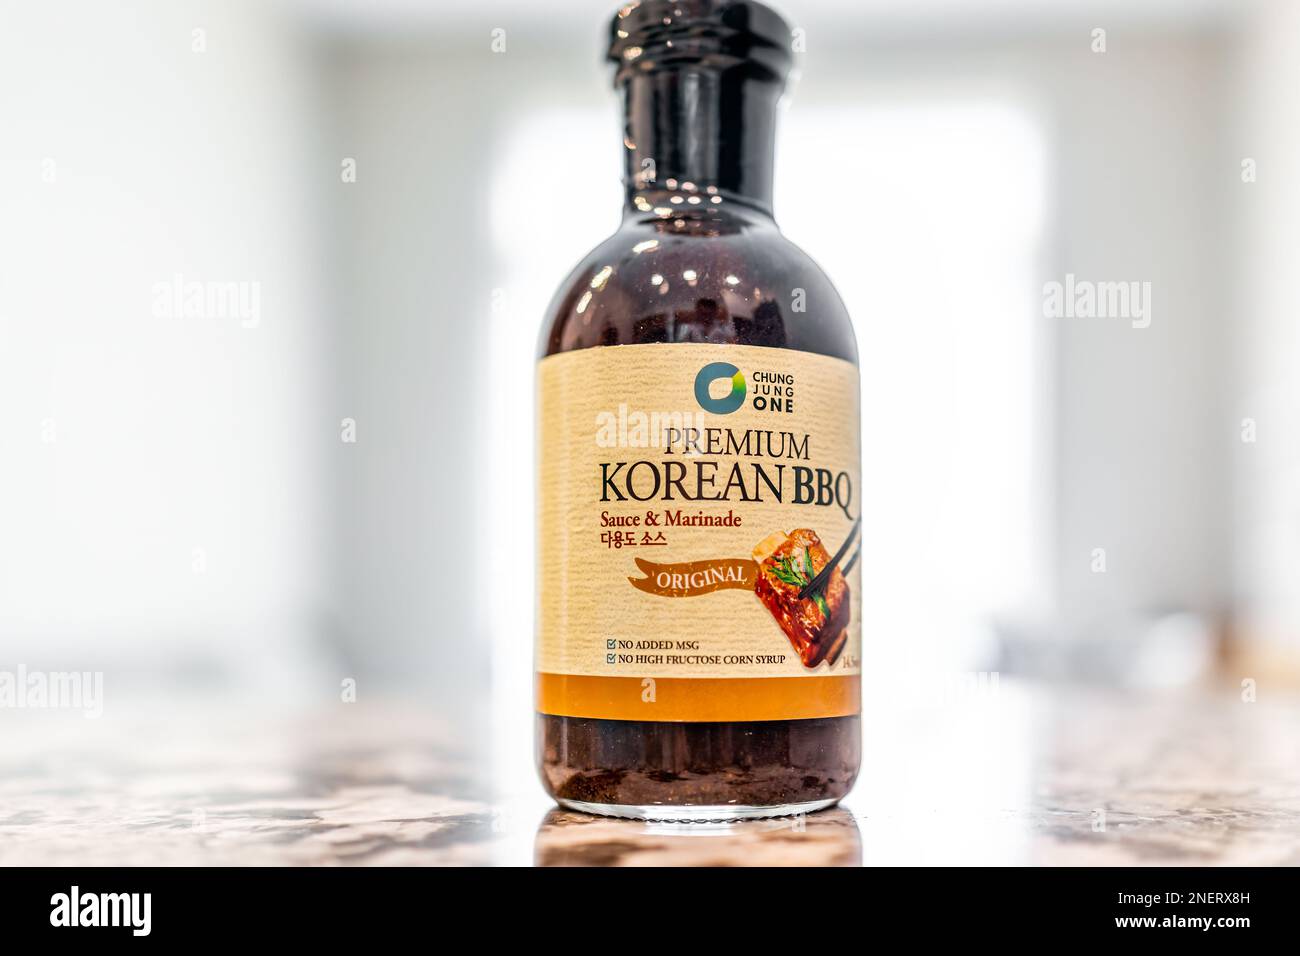 Avon, USA - June 17, 2022: Closeup of original premium Korean bbq barbecue sauce glass bottle by Chung Jung One with no msg or corn syrup Stock Photo